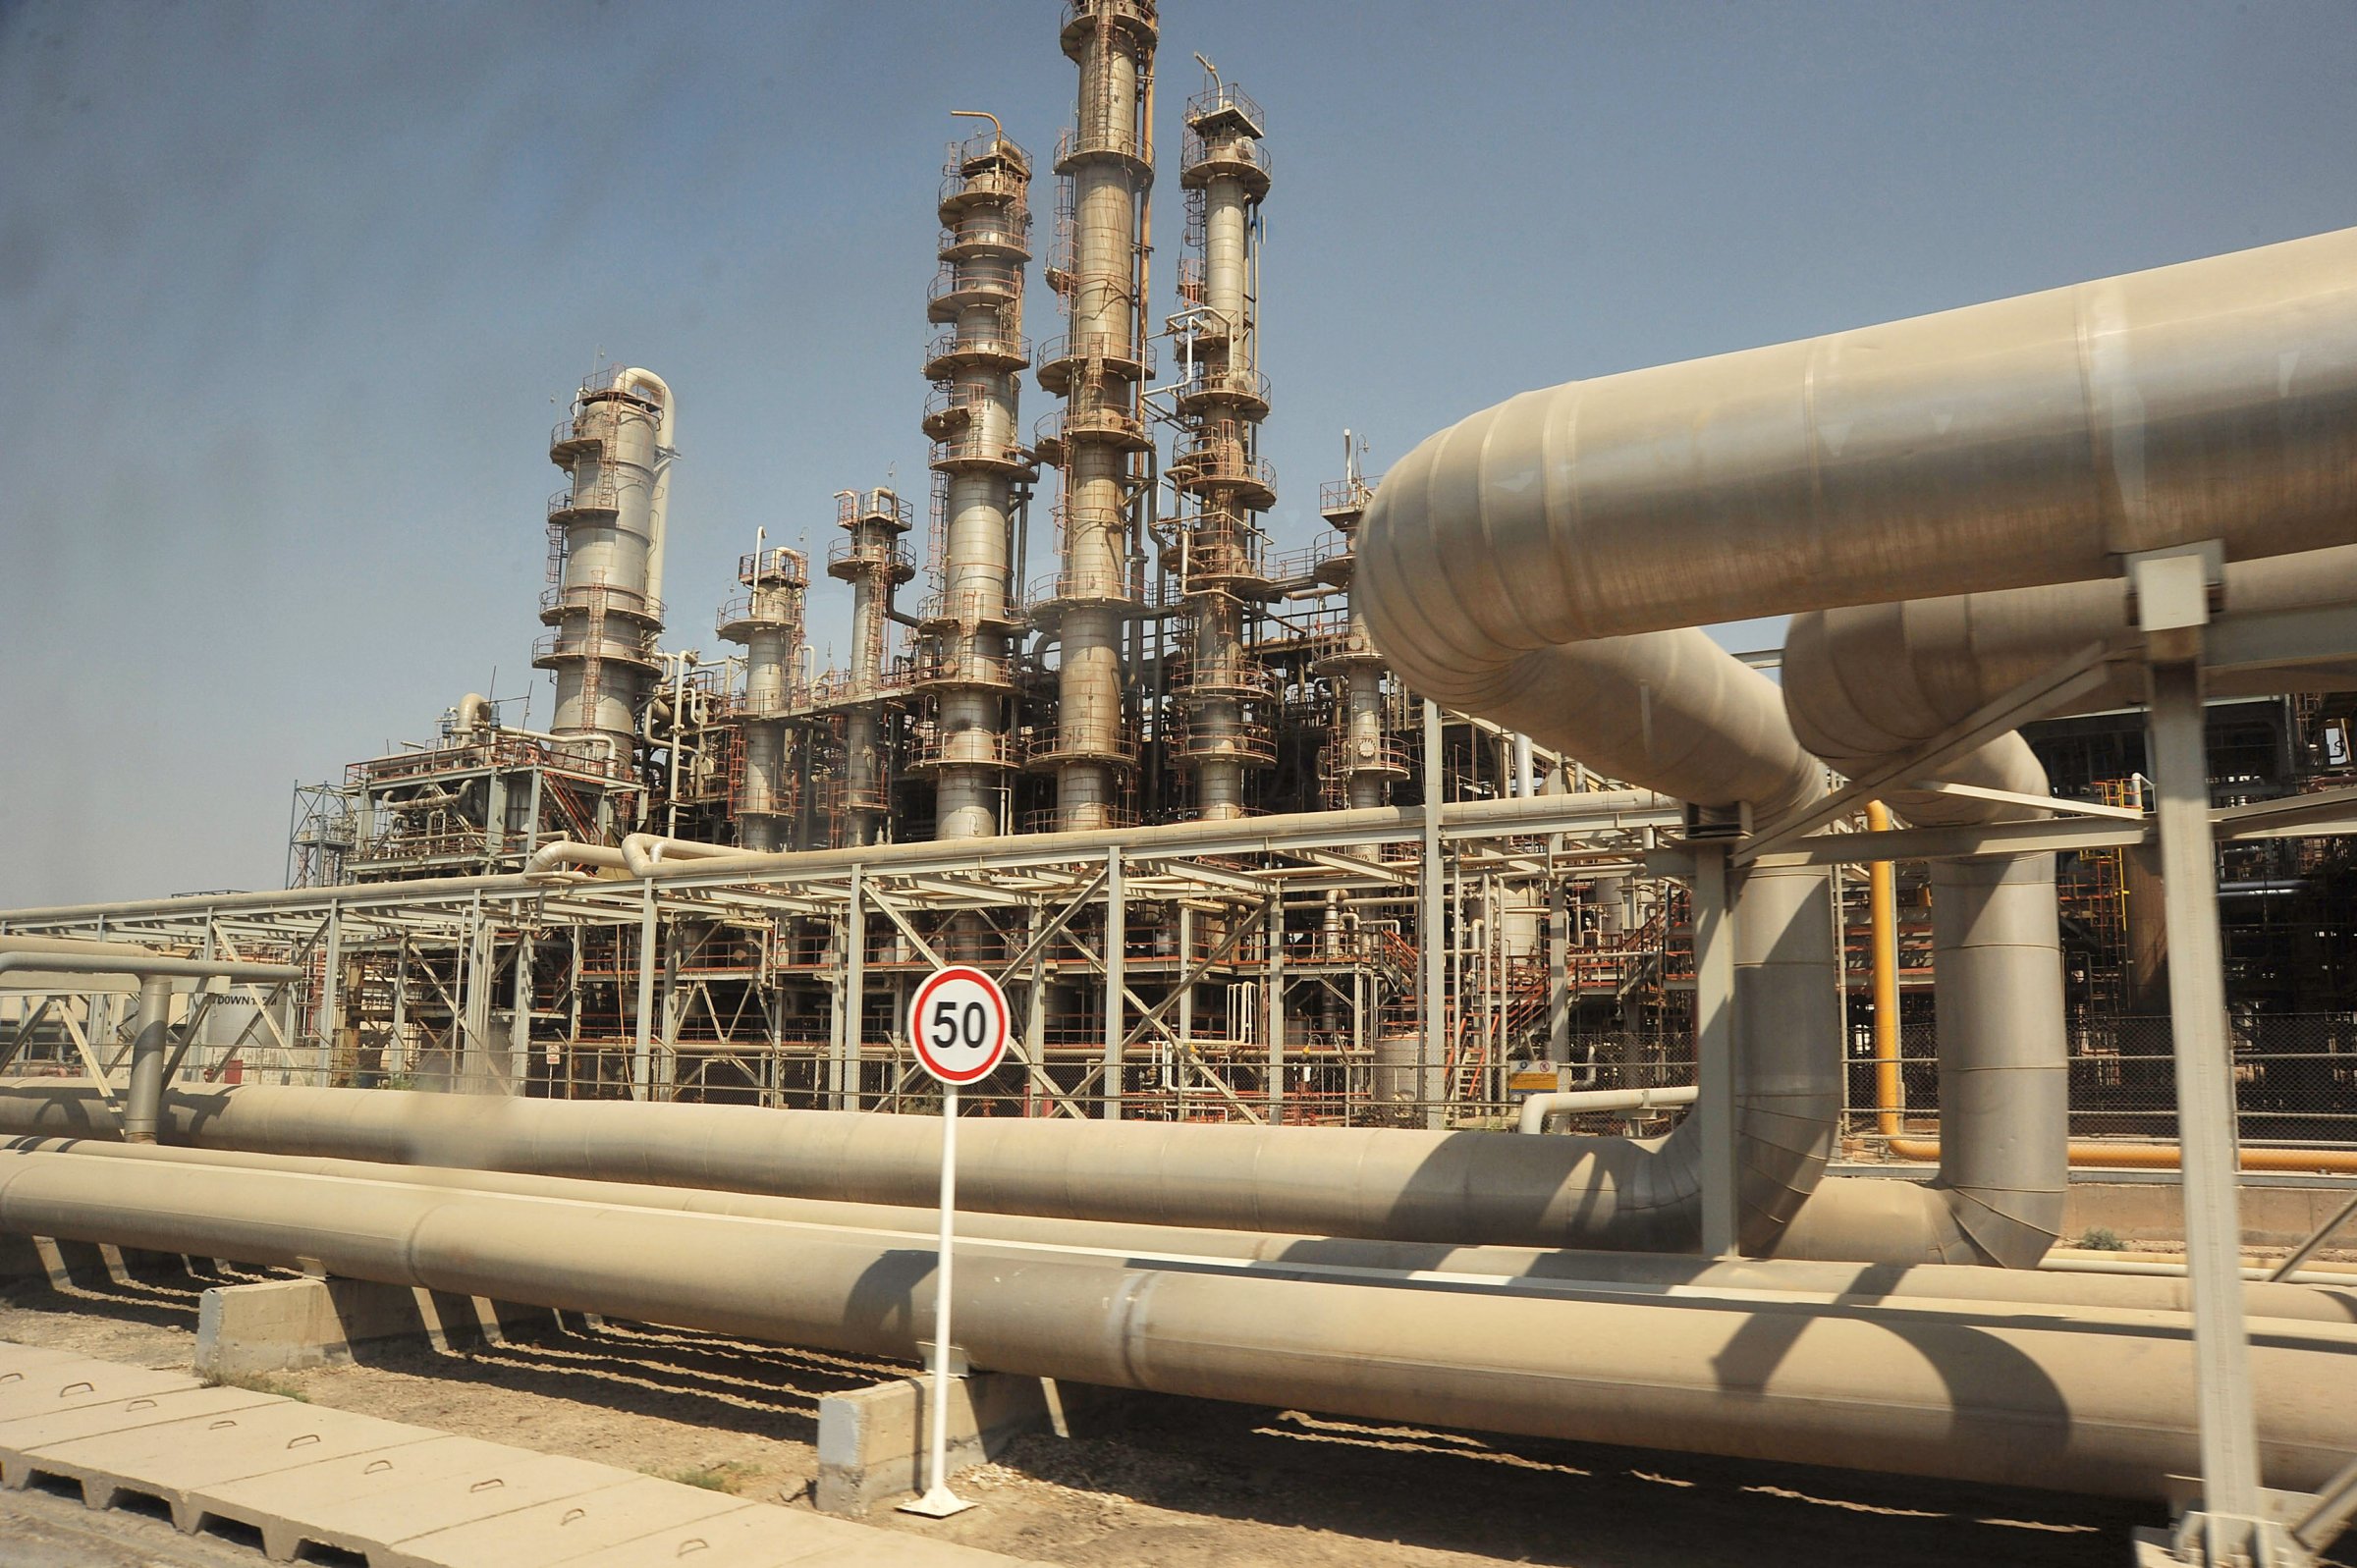 View of Iran's oil industry installations on September 28, 2011 in Mahshahr, Khuzestan province, southern Iran.